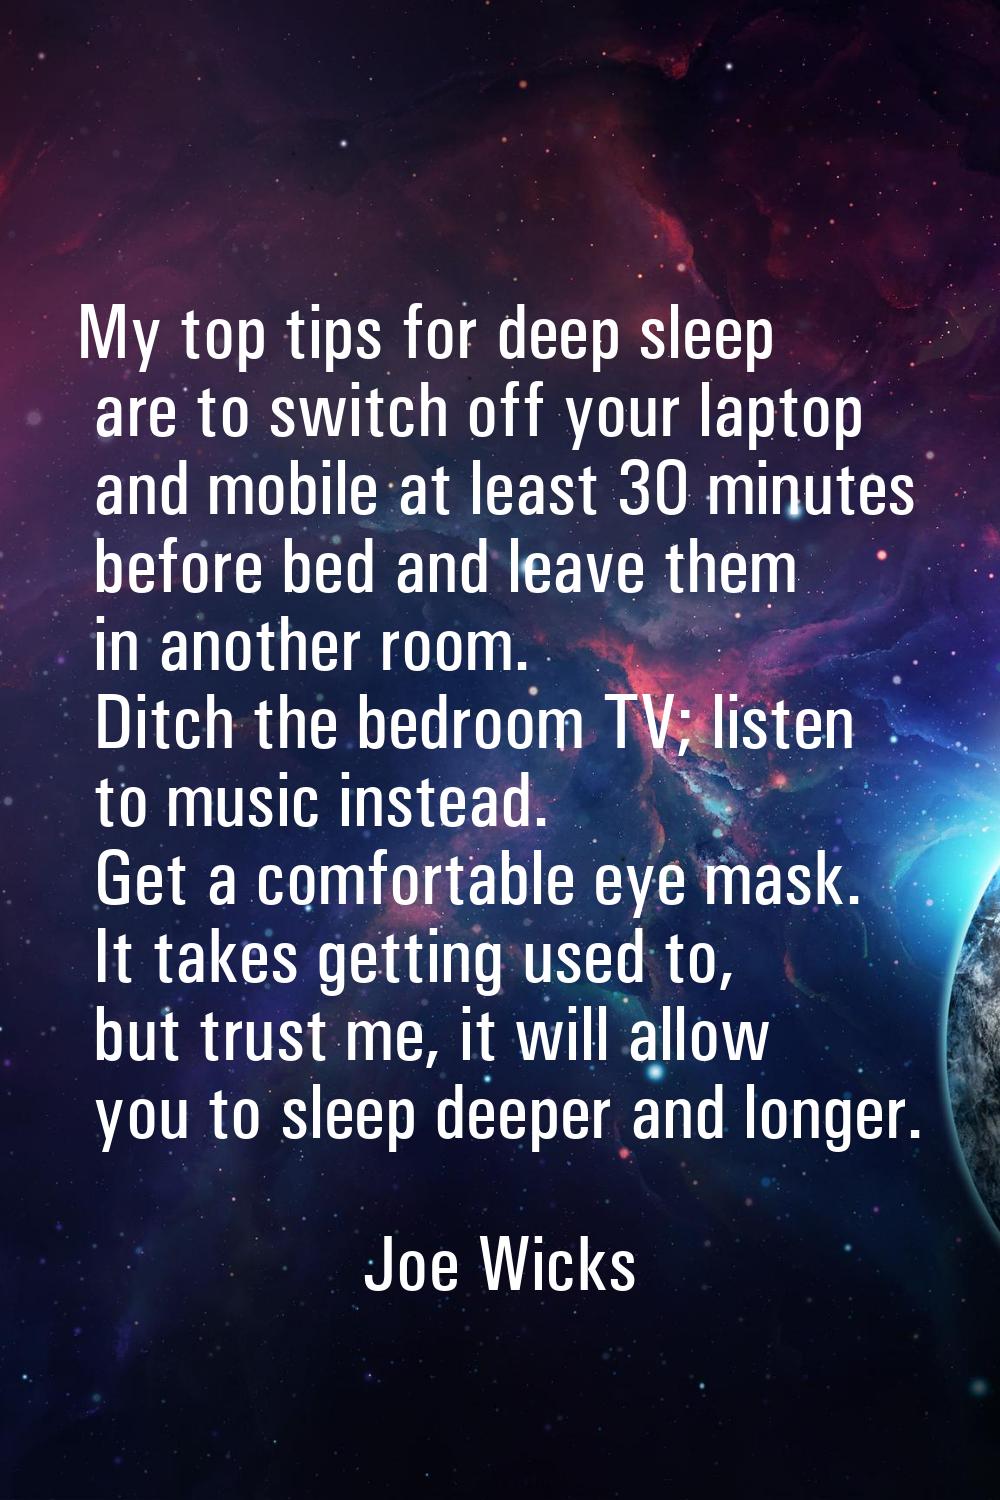 My top tips for deep sleep are to switch off your laptop and mobile at least 30 minutes before bed 